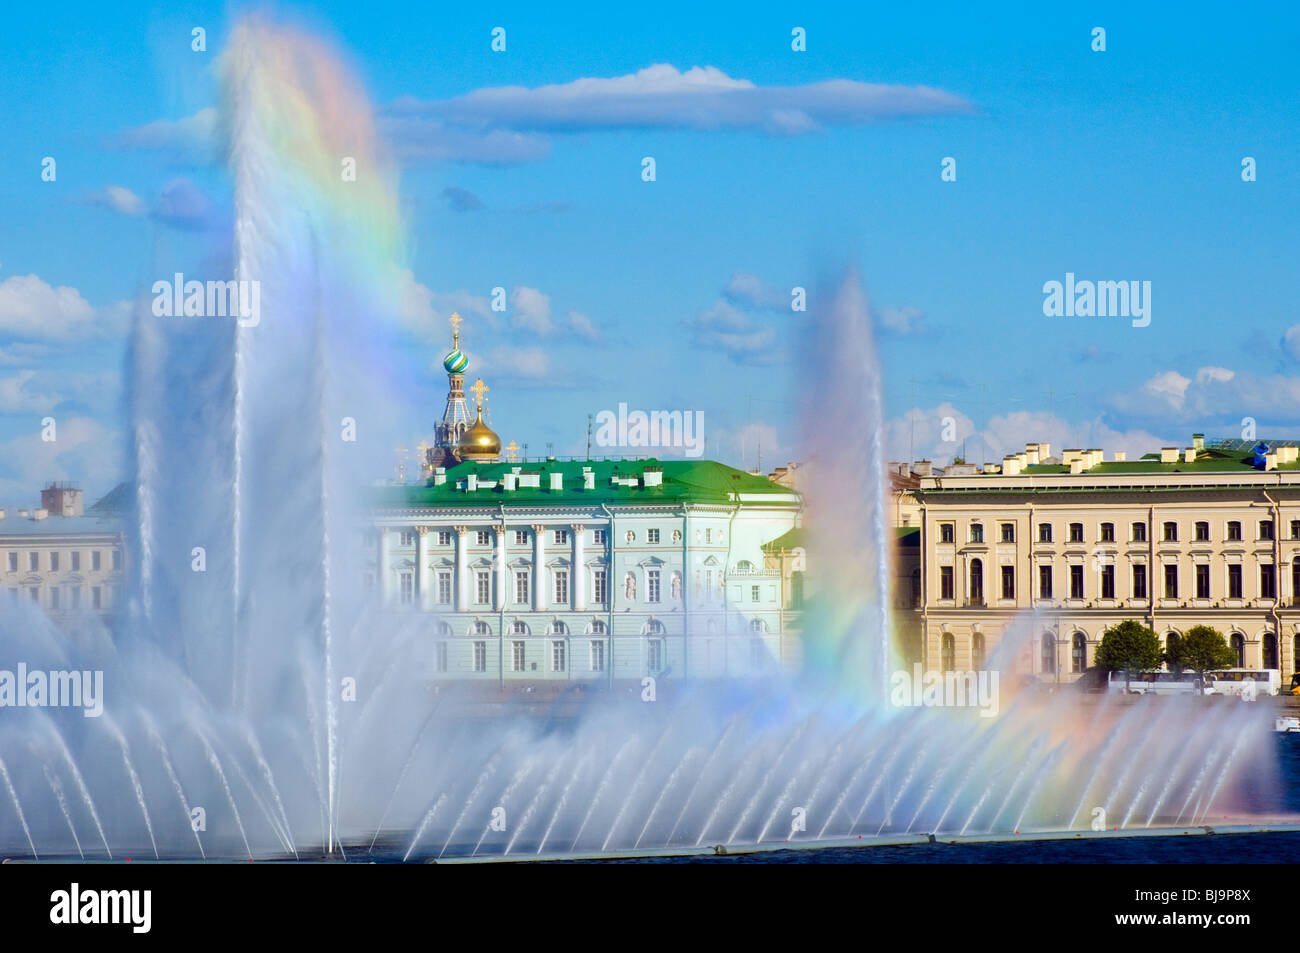 Fountains in the River Neva, St Petersburg, Russia, with buildings of the Hermitage Museum behind Stock Photo